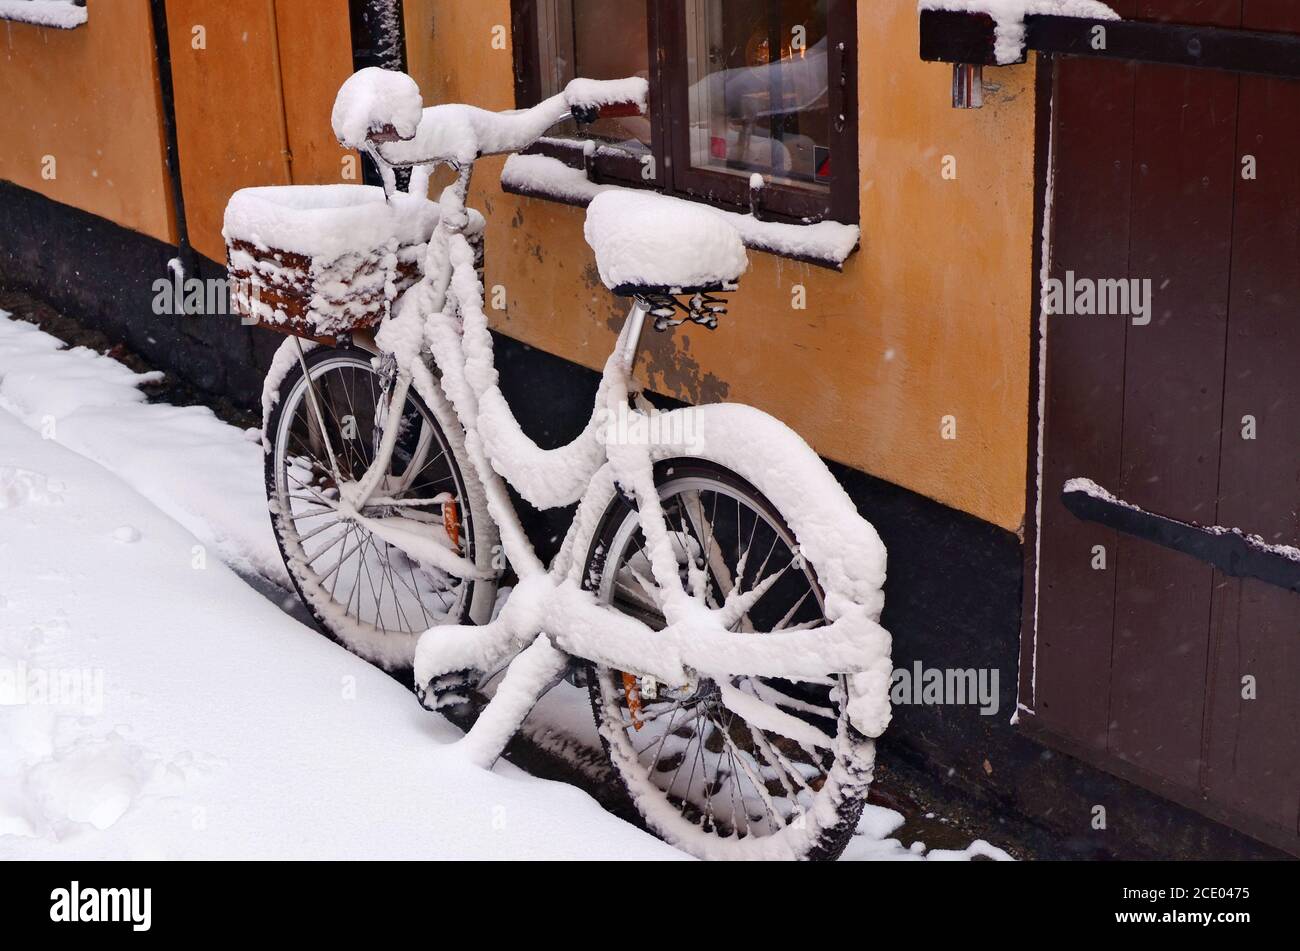 Snowy forgotten old bike on a winter street of an old European city Stock Photo